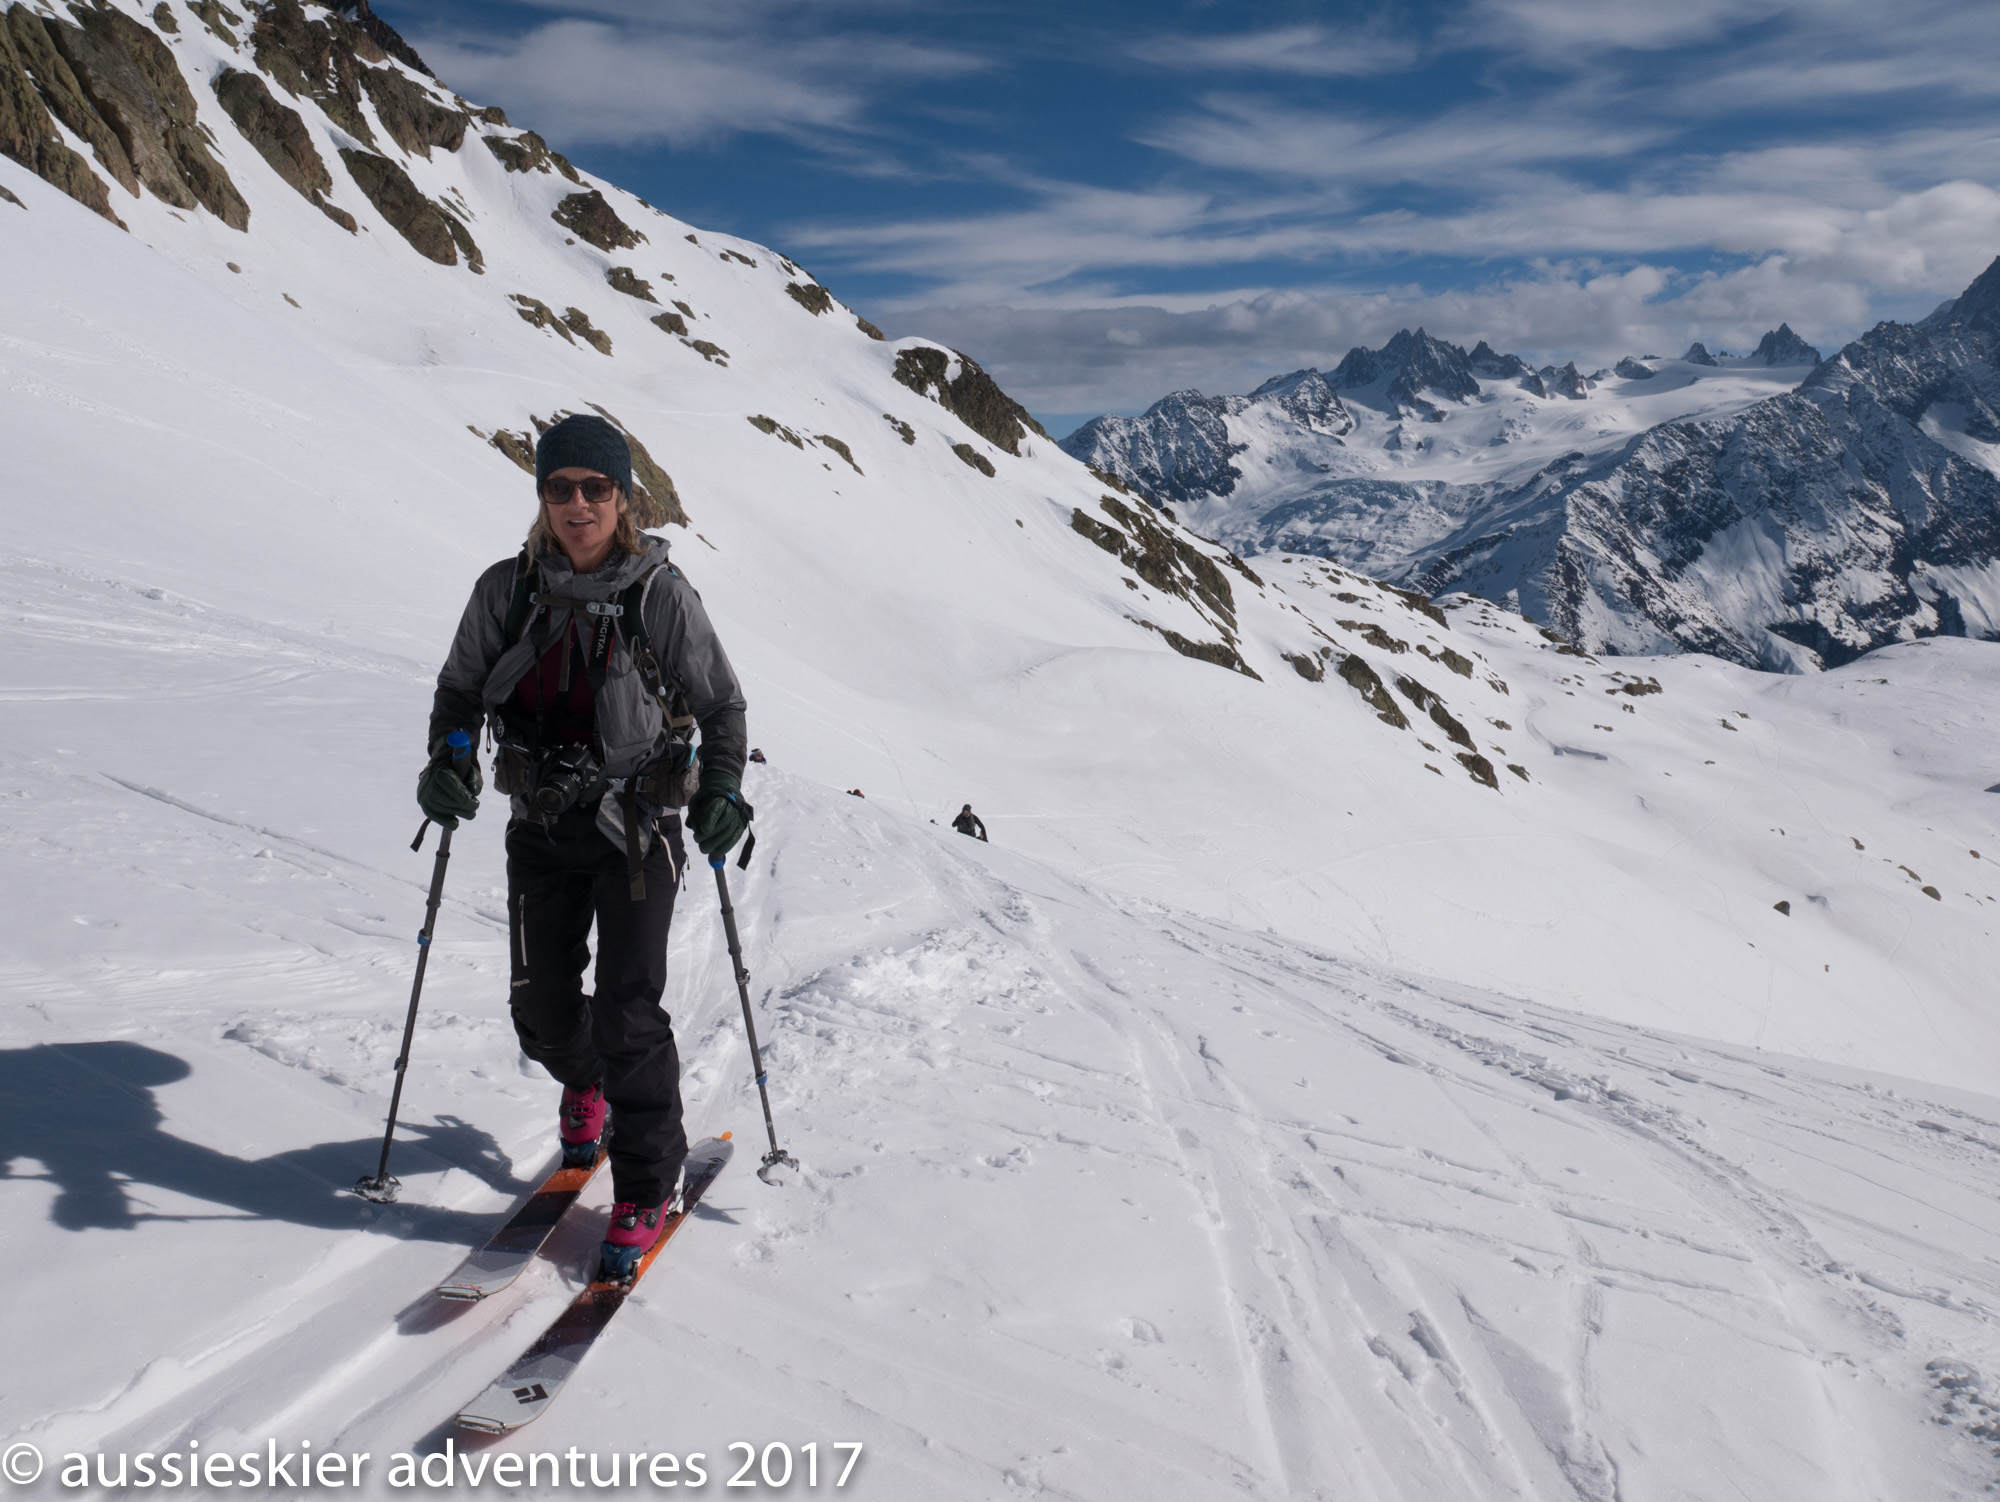 Chamonix 2017 - Ski Touring in the Aiguilles Rouges